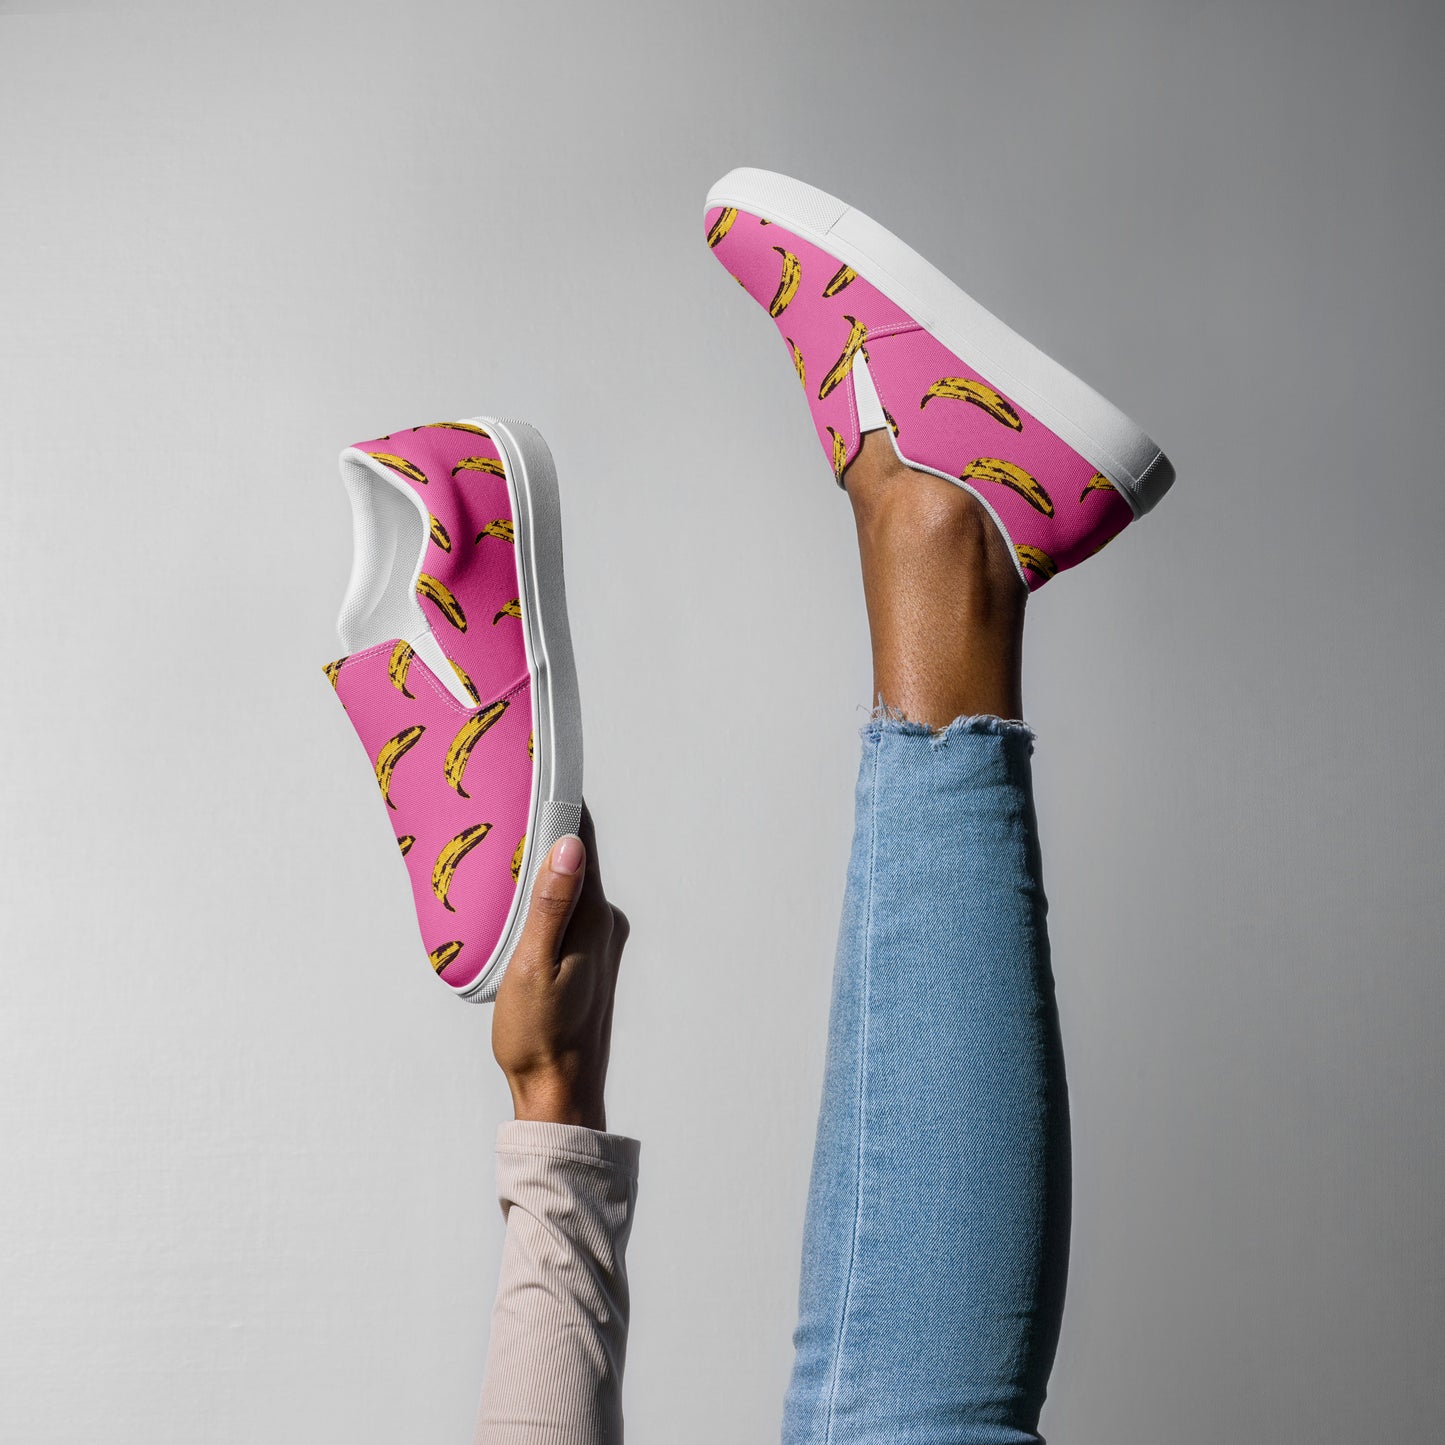 Pink Banana slip-on canvas shoes (women's sizing)